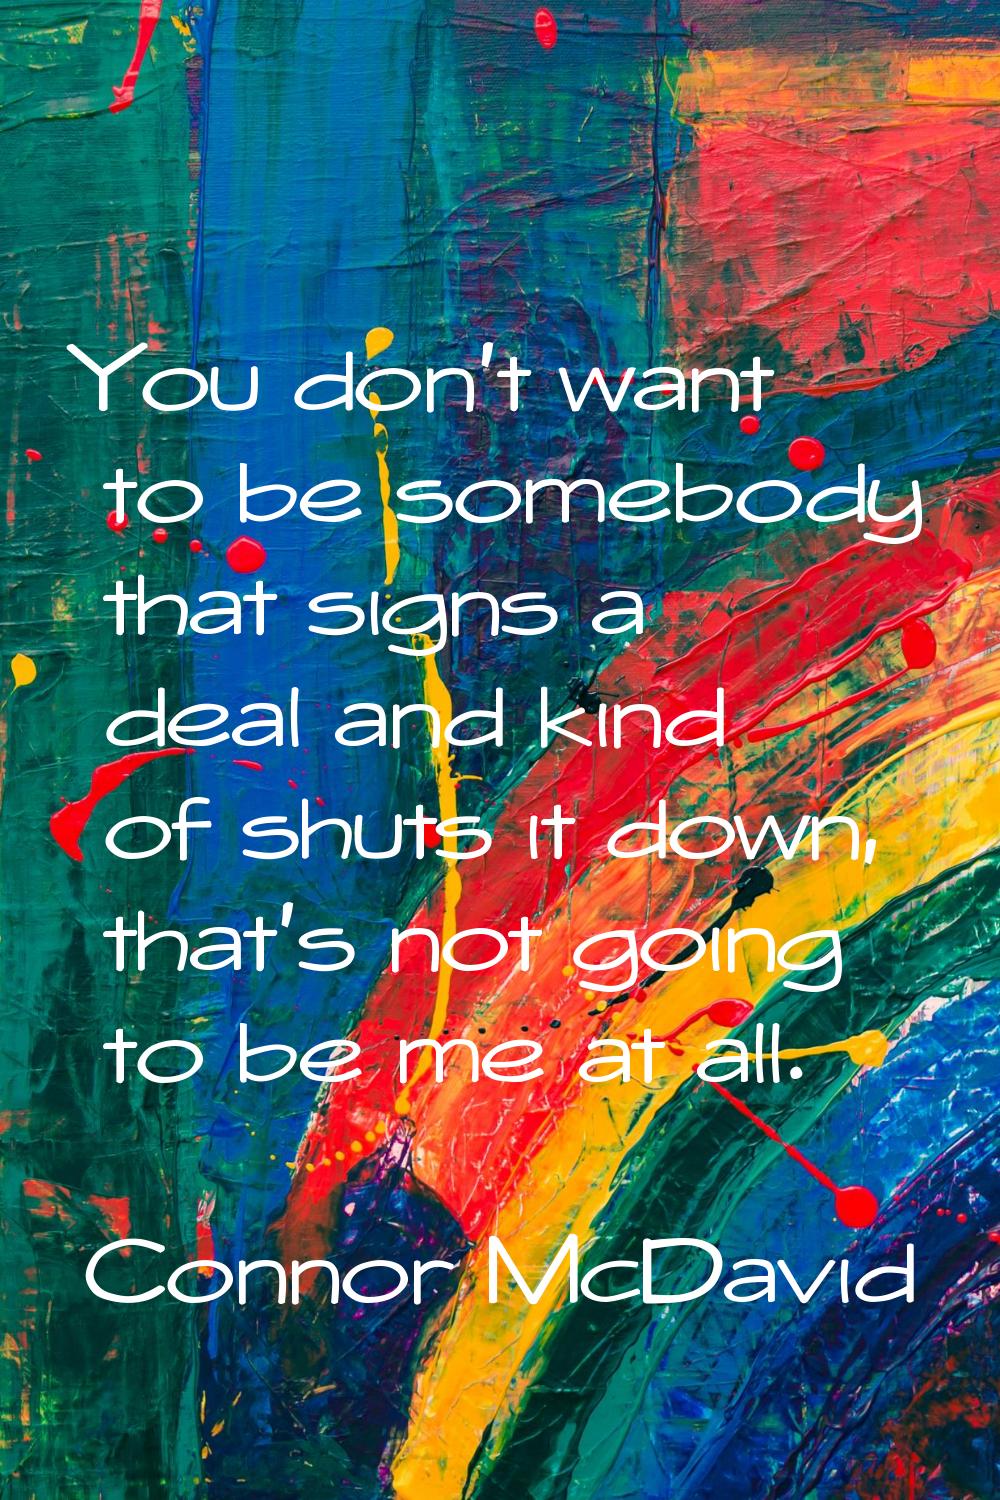 You don't want to be somebody that signs a deal and kind of shuts it down, that's not going to be m